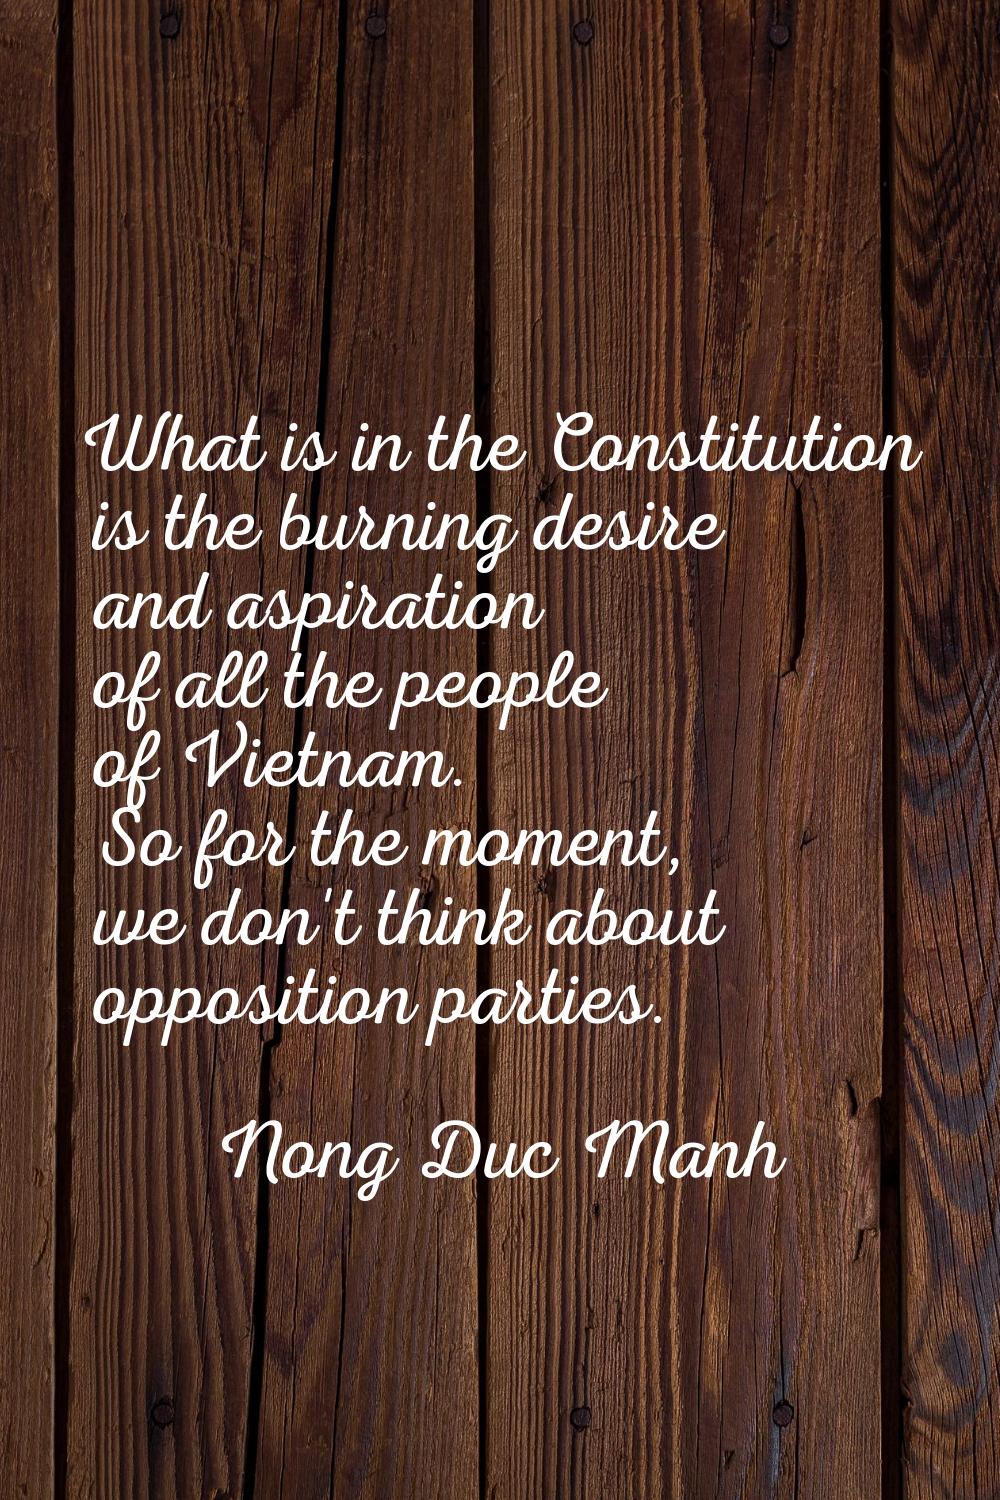 What is in the Constitution is the burning desire and aspiration of all the people of Vietnam. So f